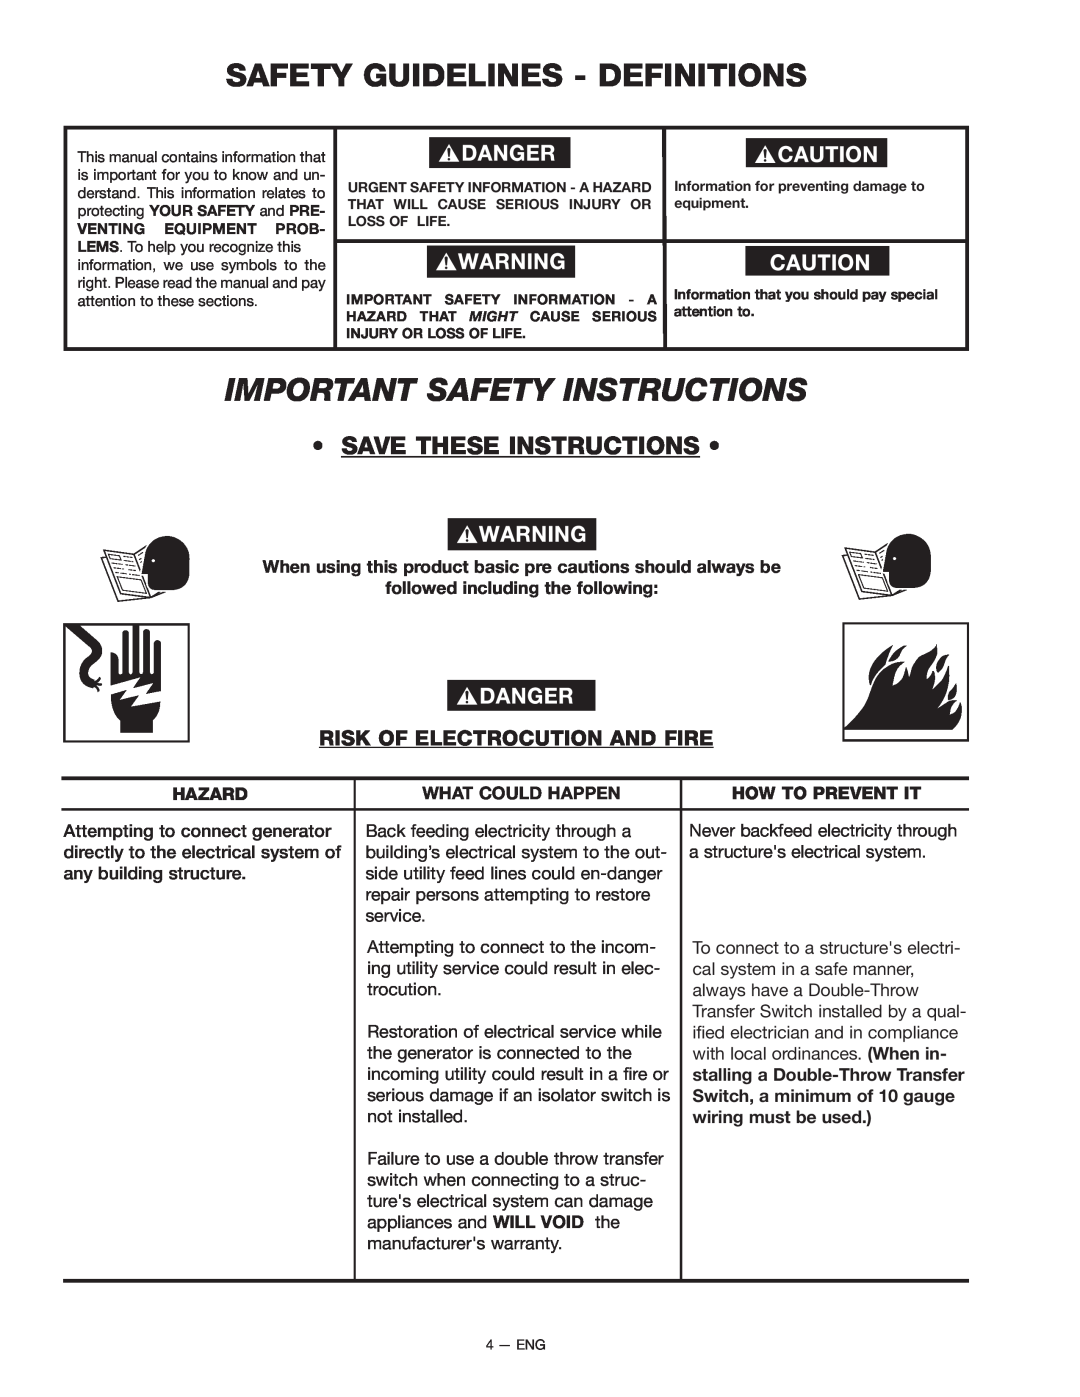 Porter-Cable H1000 Important Safety Instructions, Save These Instructions, Risk Of Electrocution And Fire, Hazard 